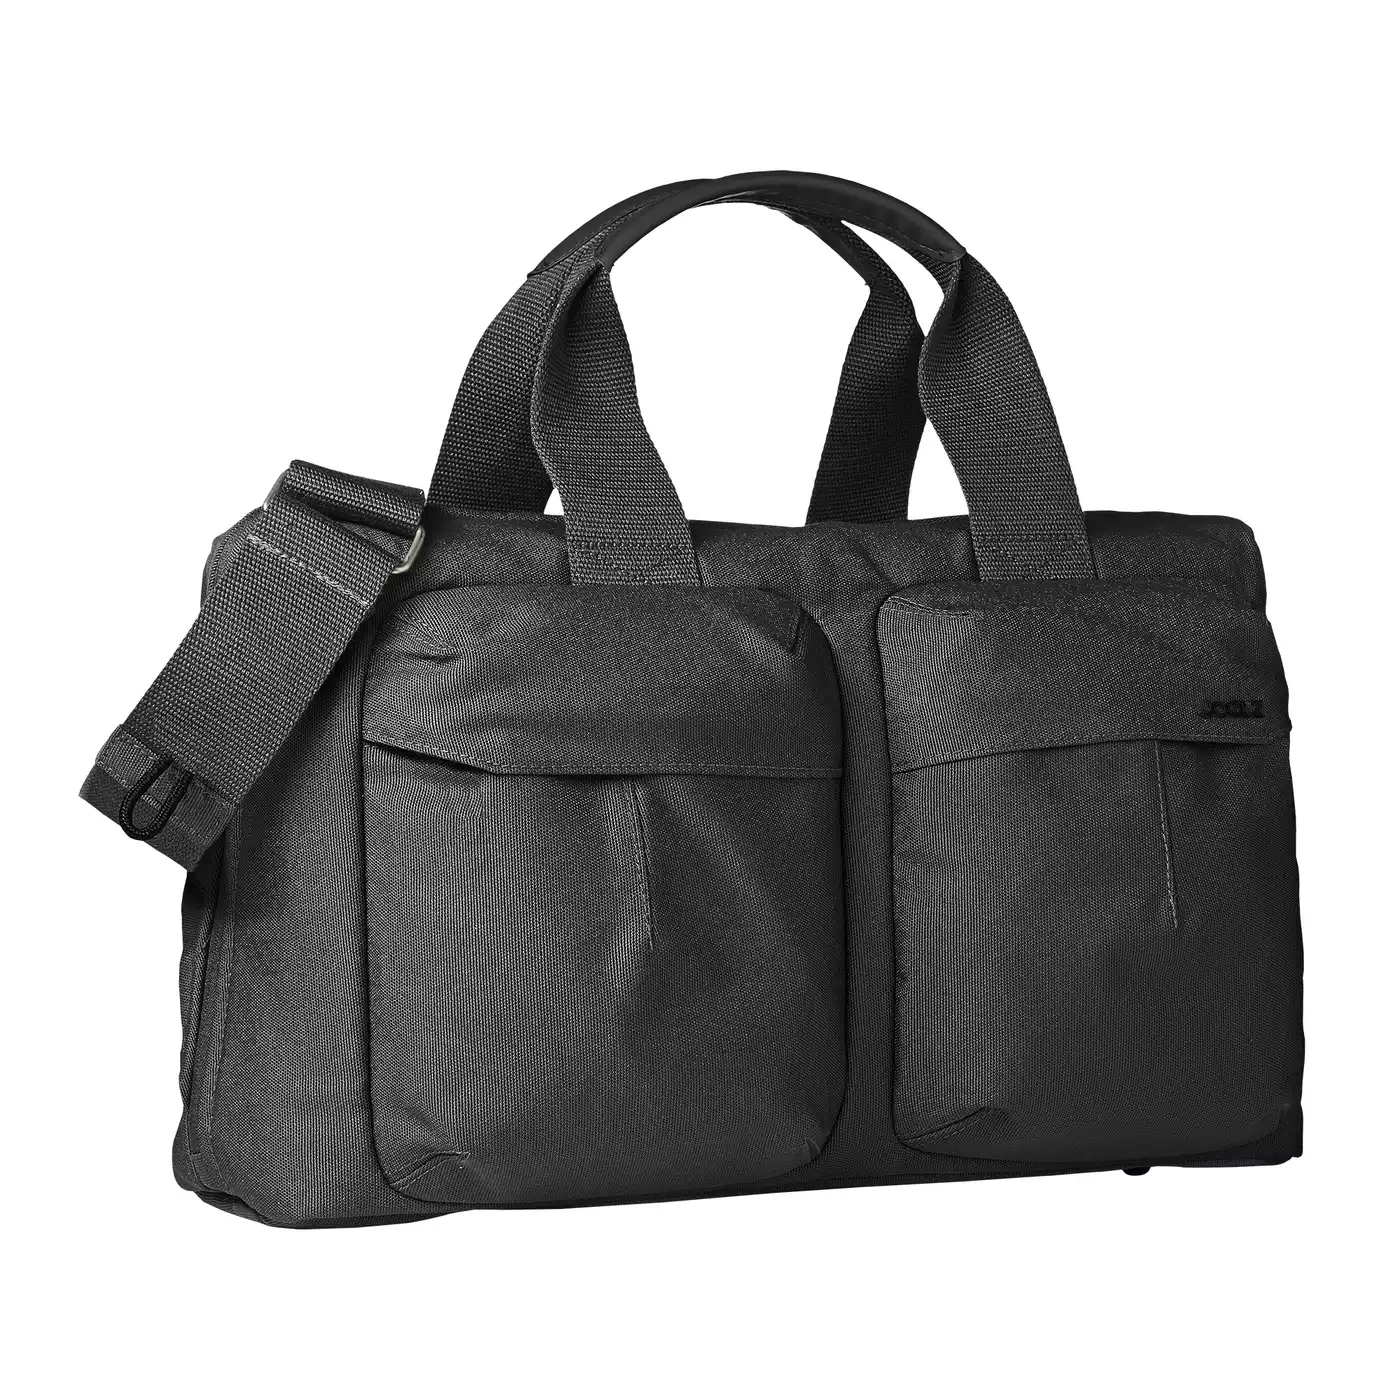 Wickeltasche Awesome Anthracite JOOLZ Anthrazit 2000579009105 3